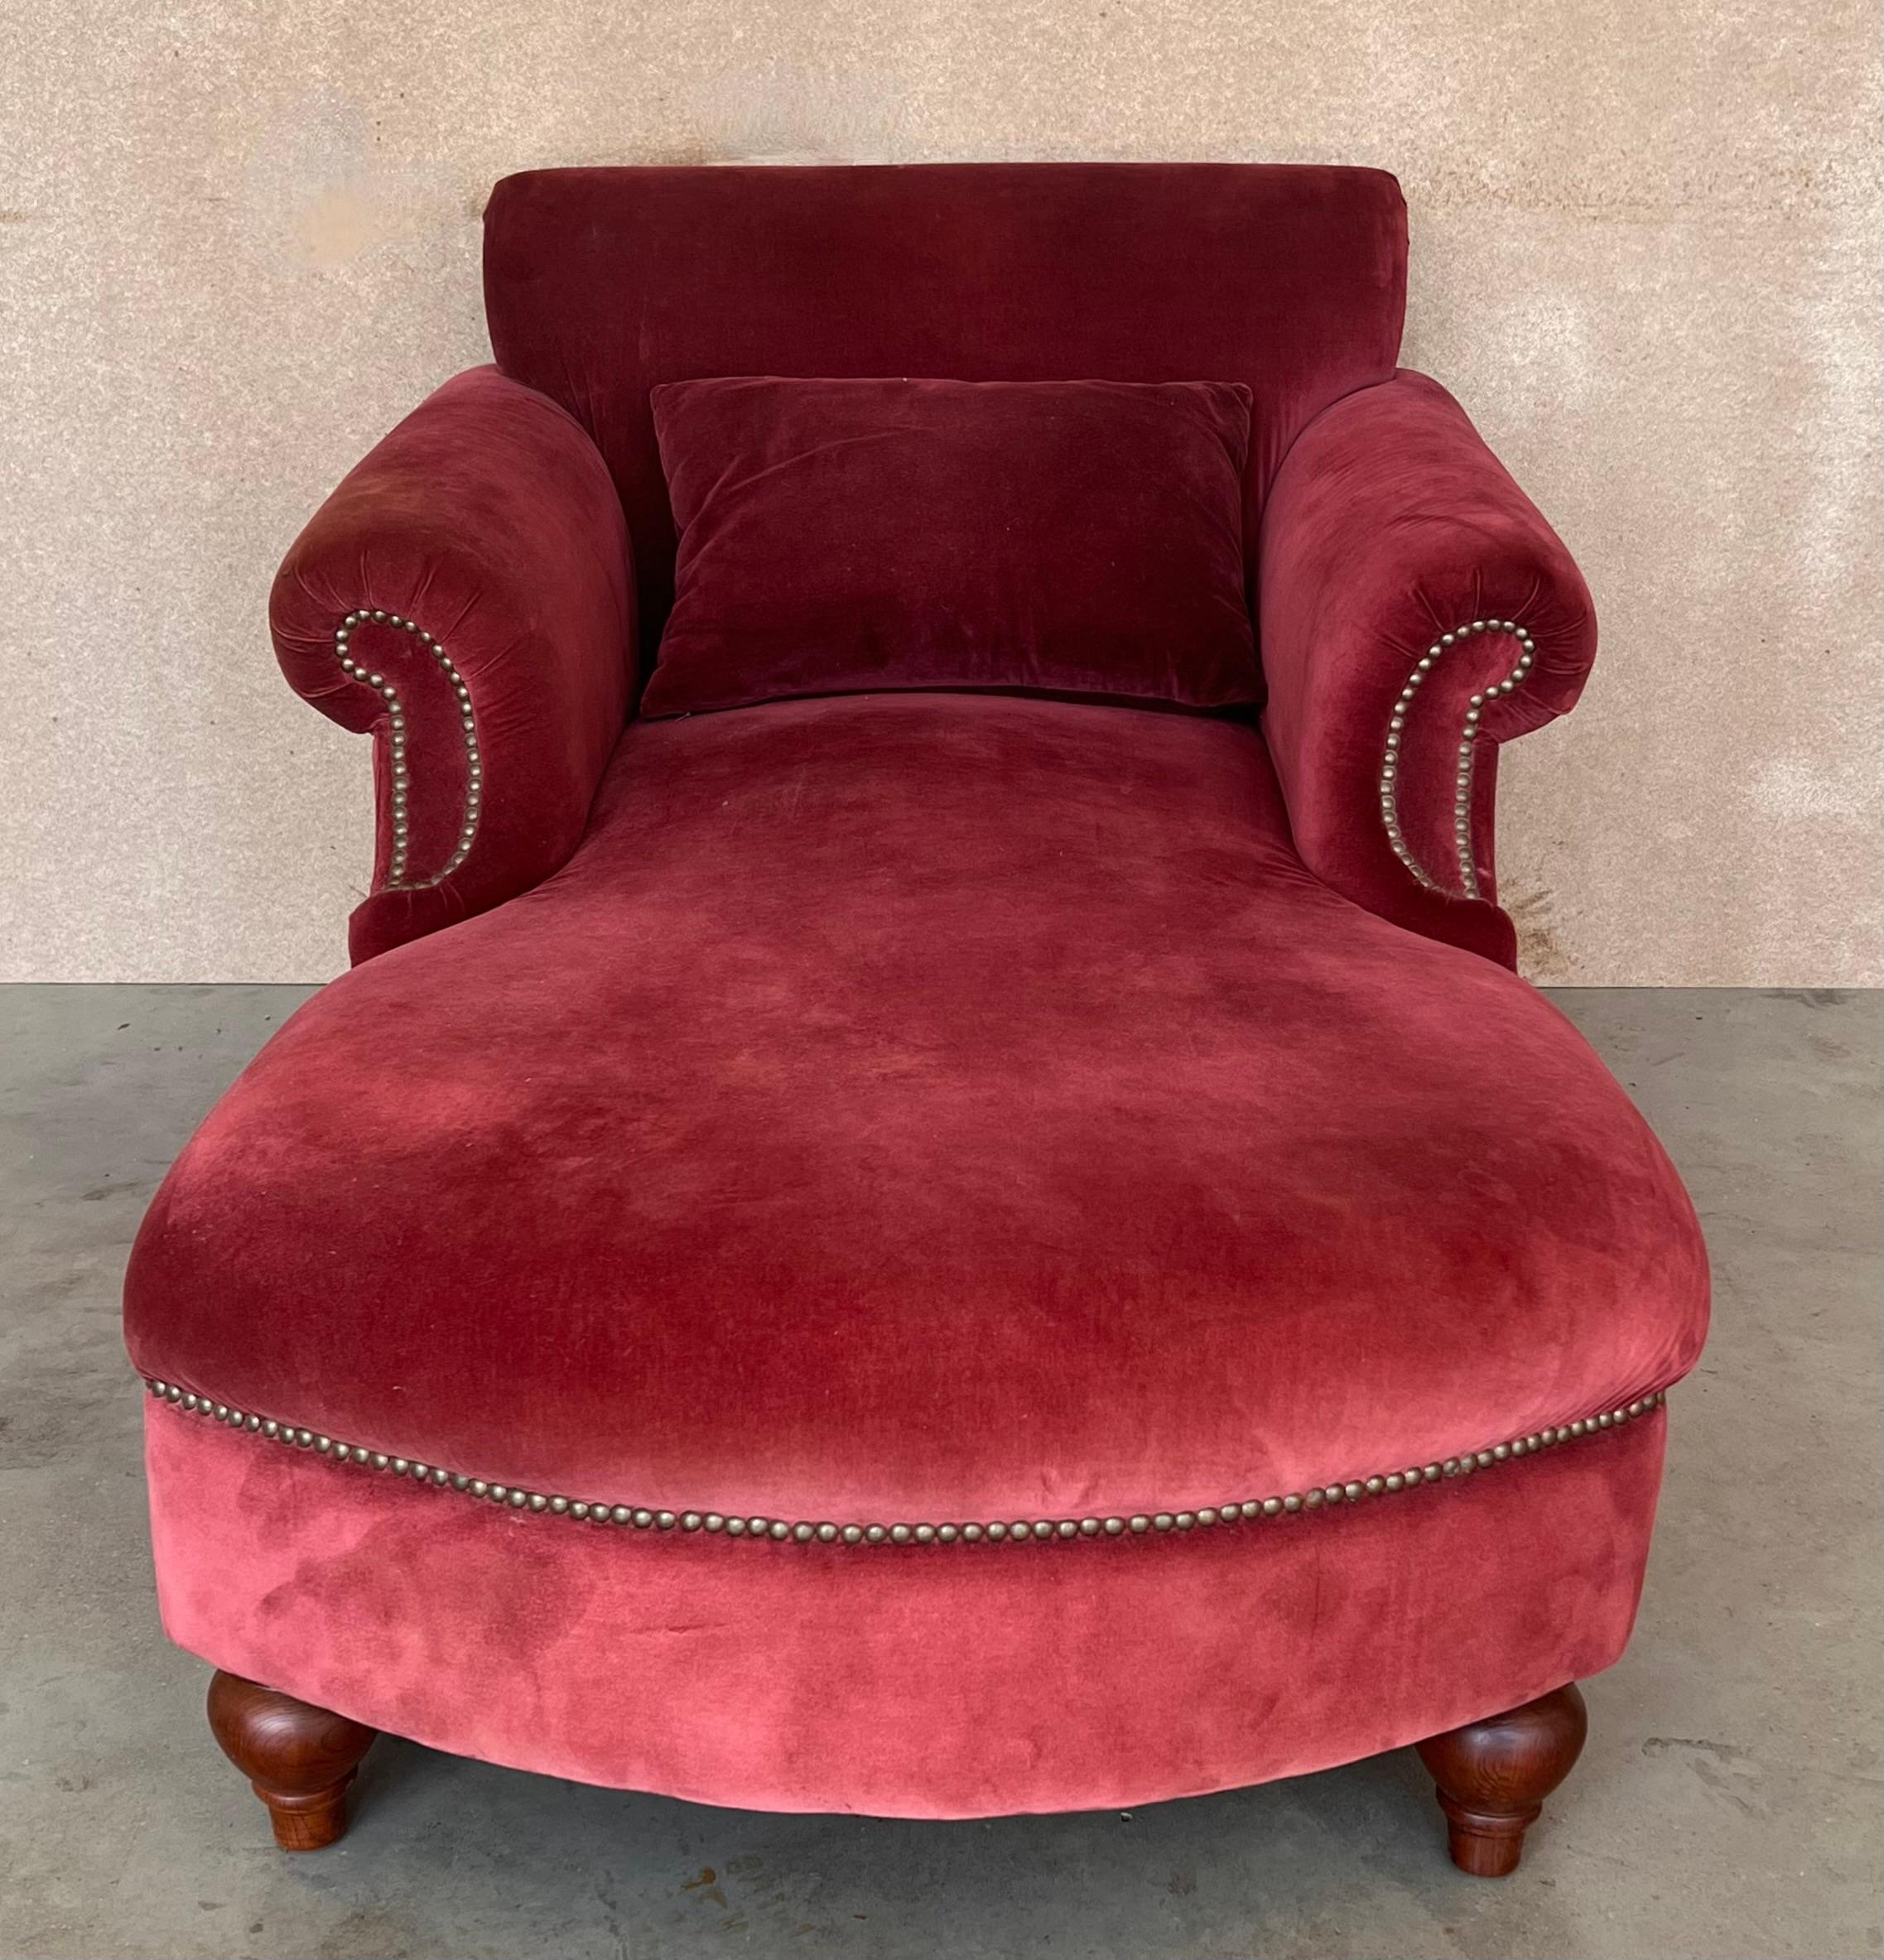 20th Century 20th Italian Maroon Velvet Chaise Longue with arms For Sale